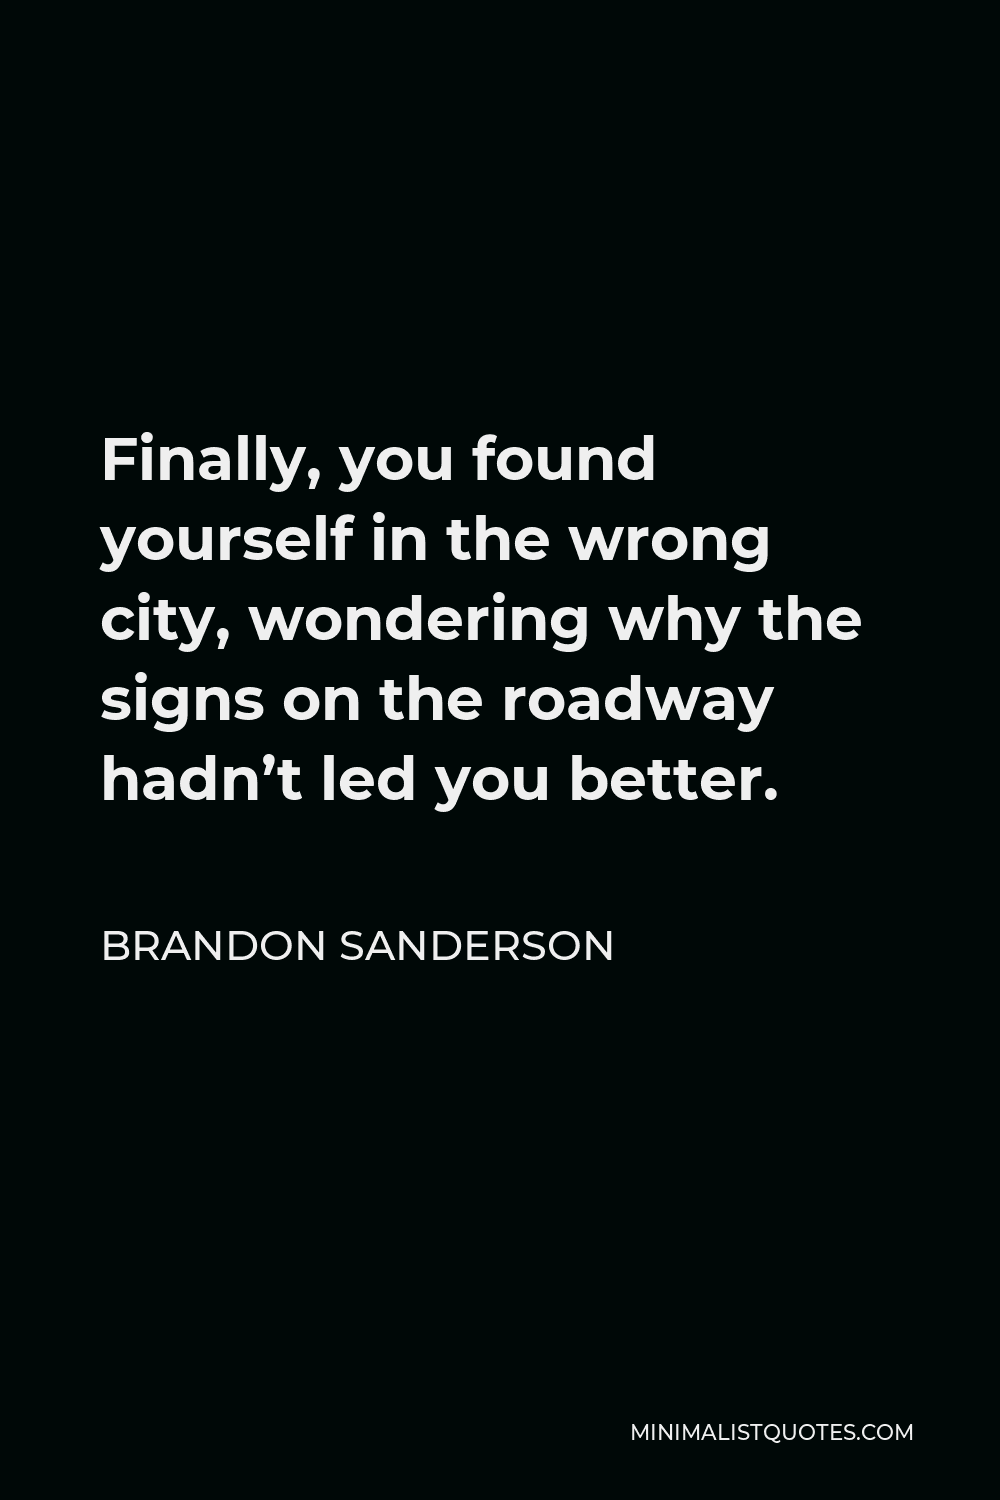 Brandon Sanderson Quote - Finally, you found yourself in the wrong city, wondering why the signs on the roadway hadn’t led you better.